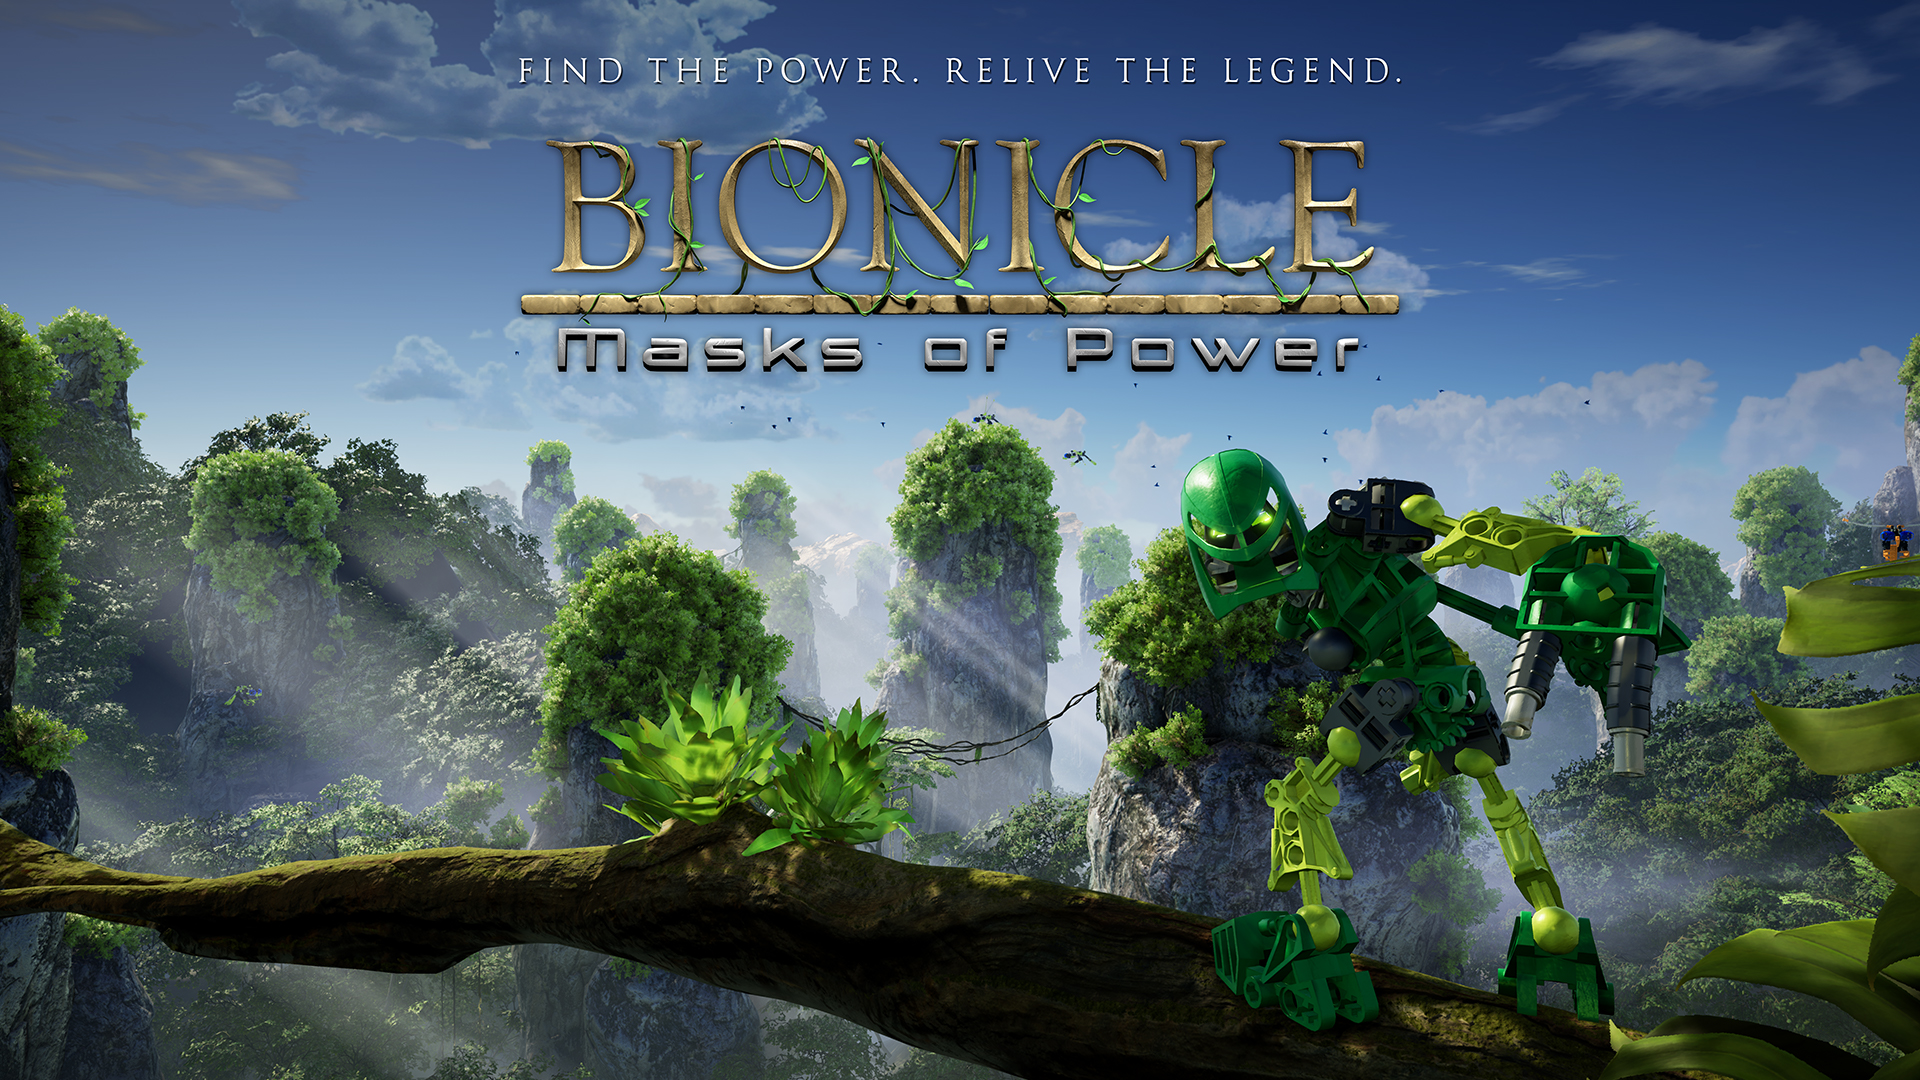 Bionicle: Masks of Power 